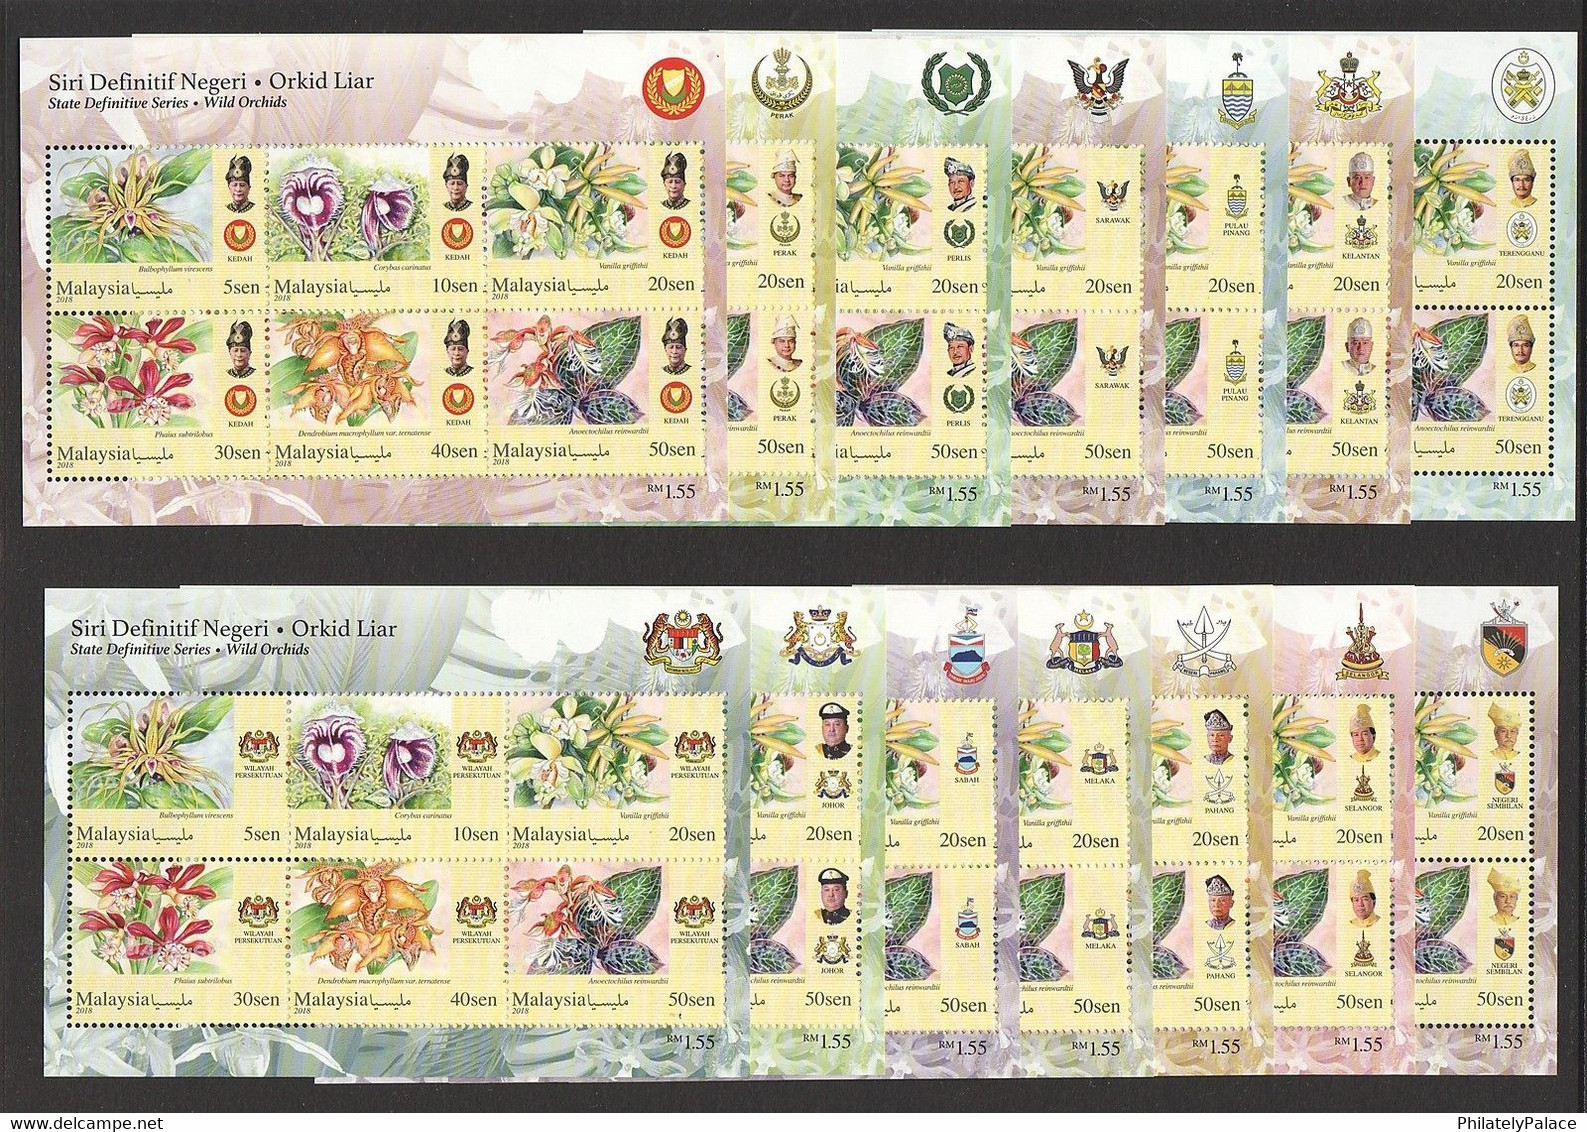 MALAYSIA 2018 WILD ORCHIDS FLOWERS STATES DEFINITIVE 14 SOUVENIR SHEETS OF 6 STAMPS EACH MNH (**) - Malaysia (1964-...)